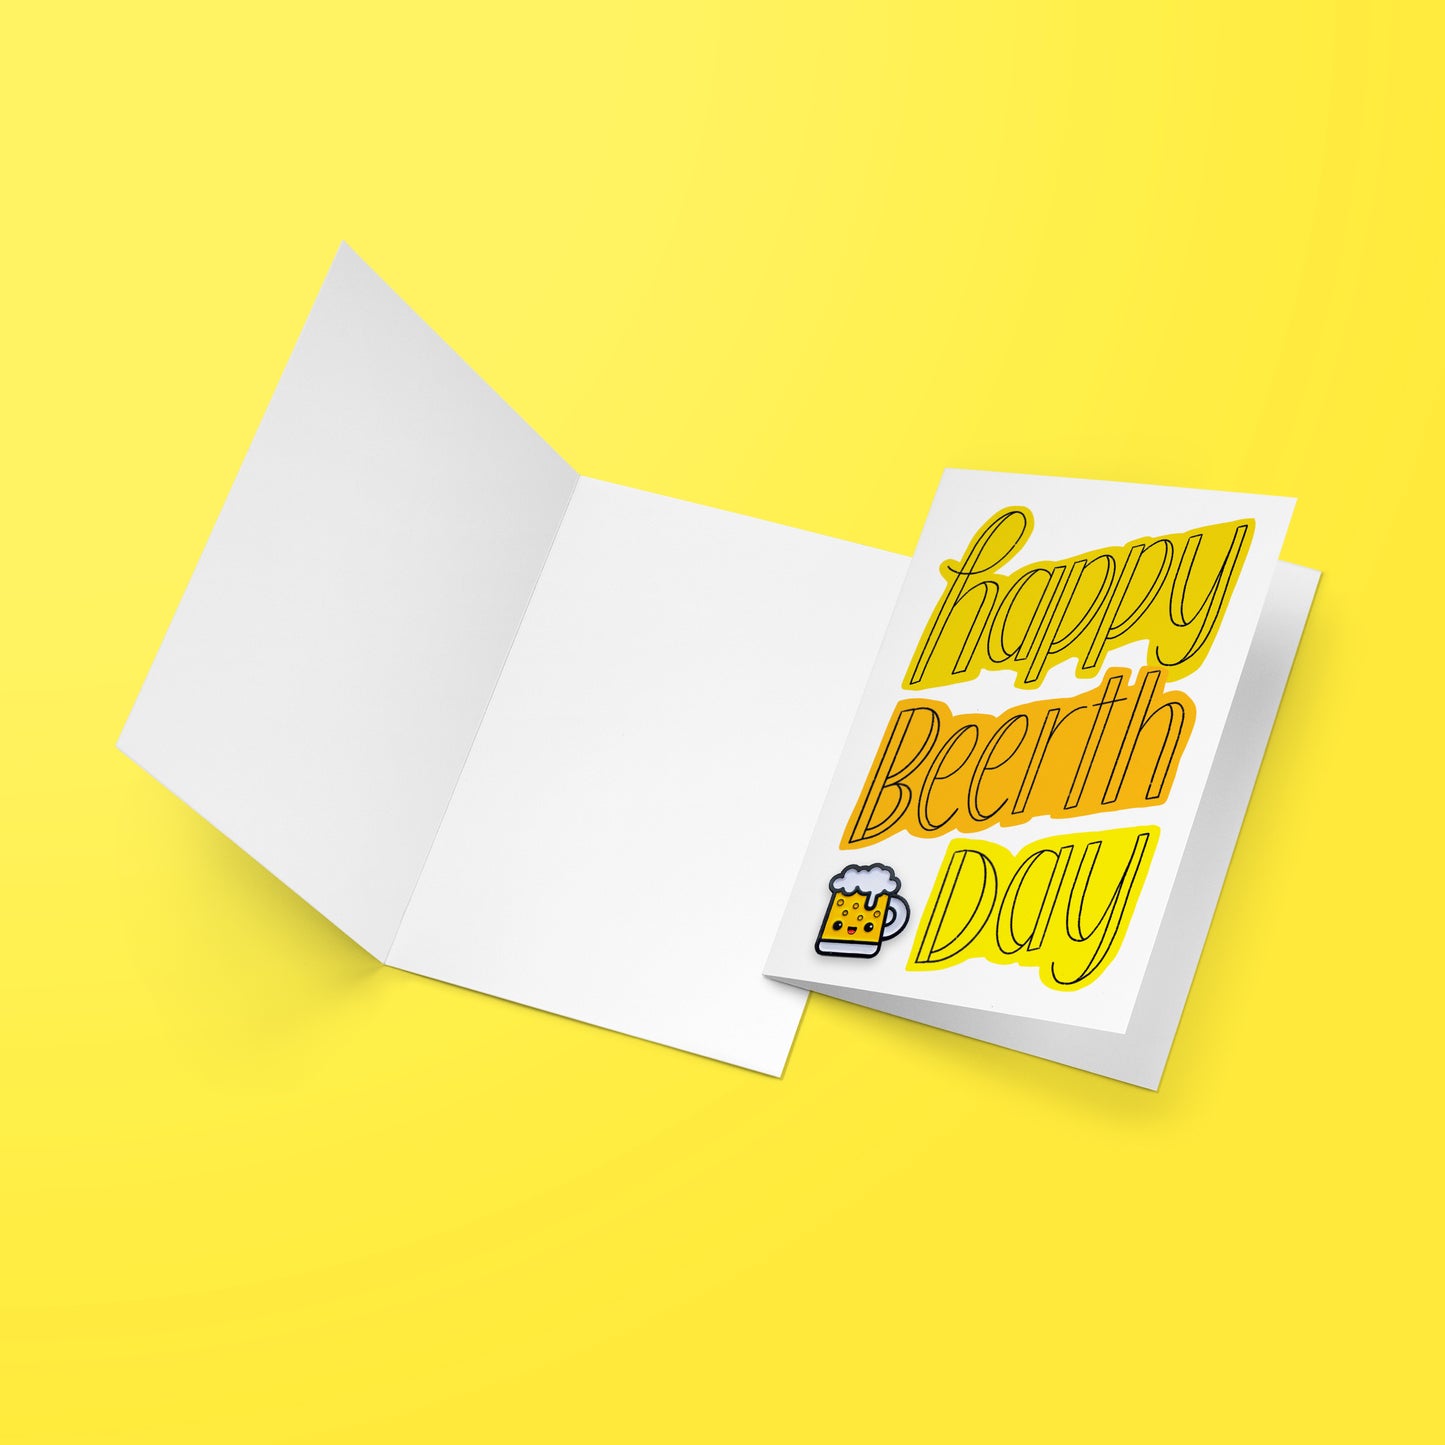 Happy Beerthday greeting card opened on yellow background